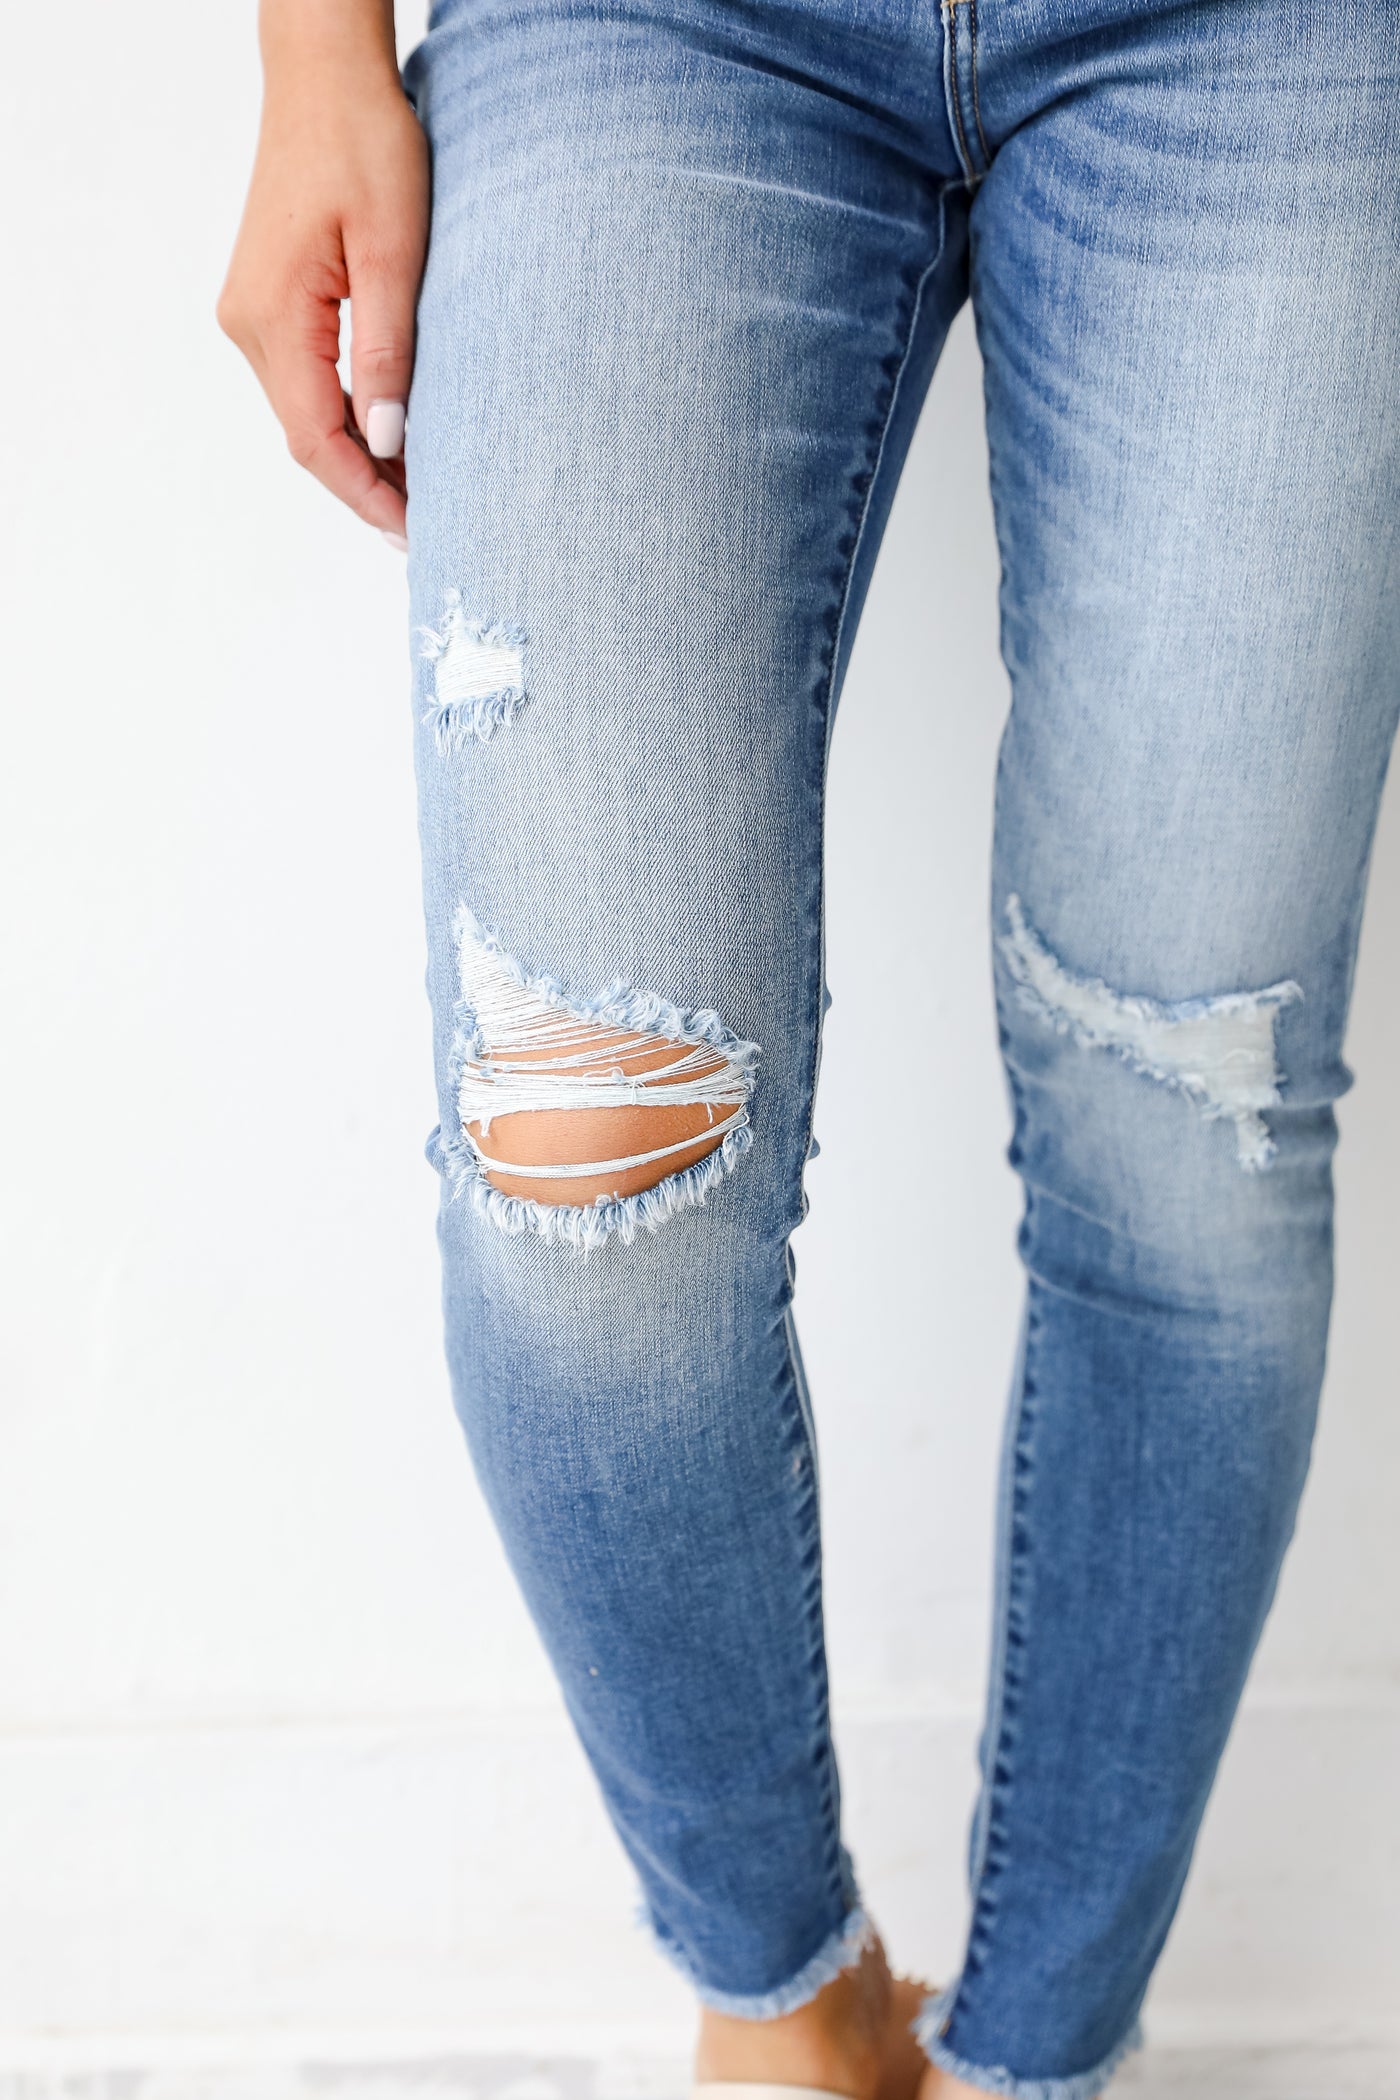 Distressed Skinny Jeans front view